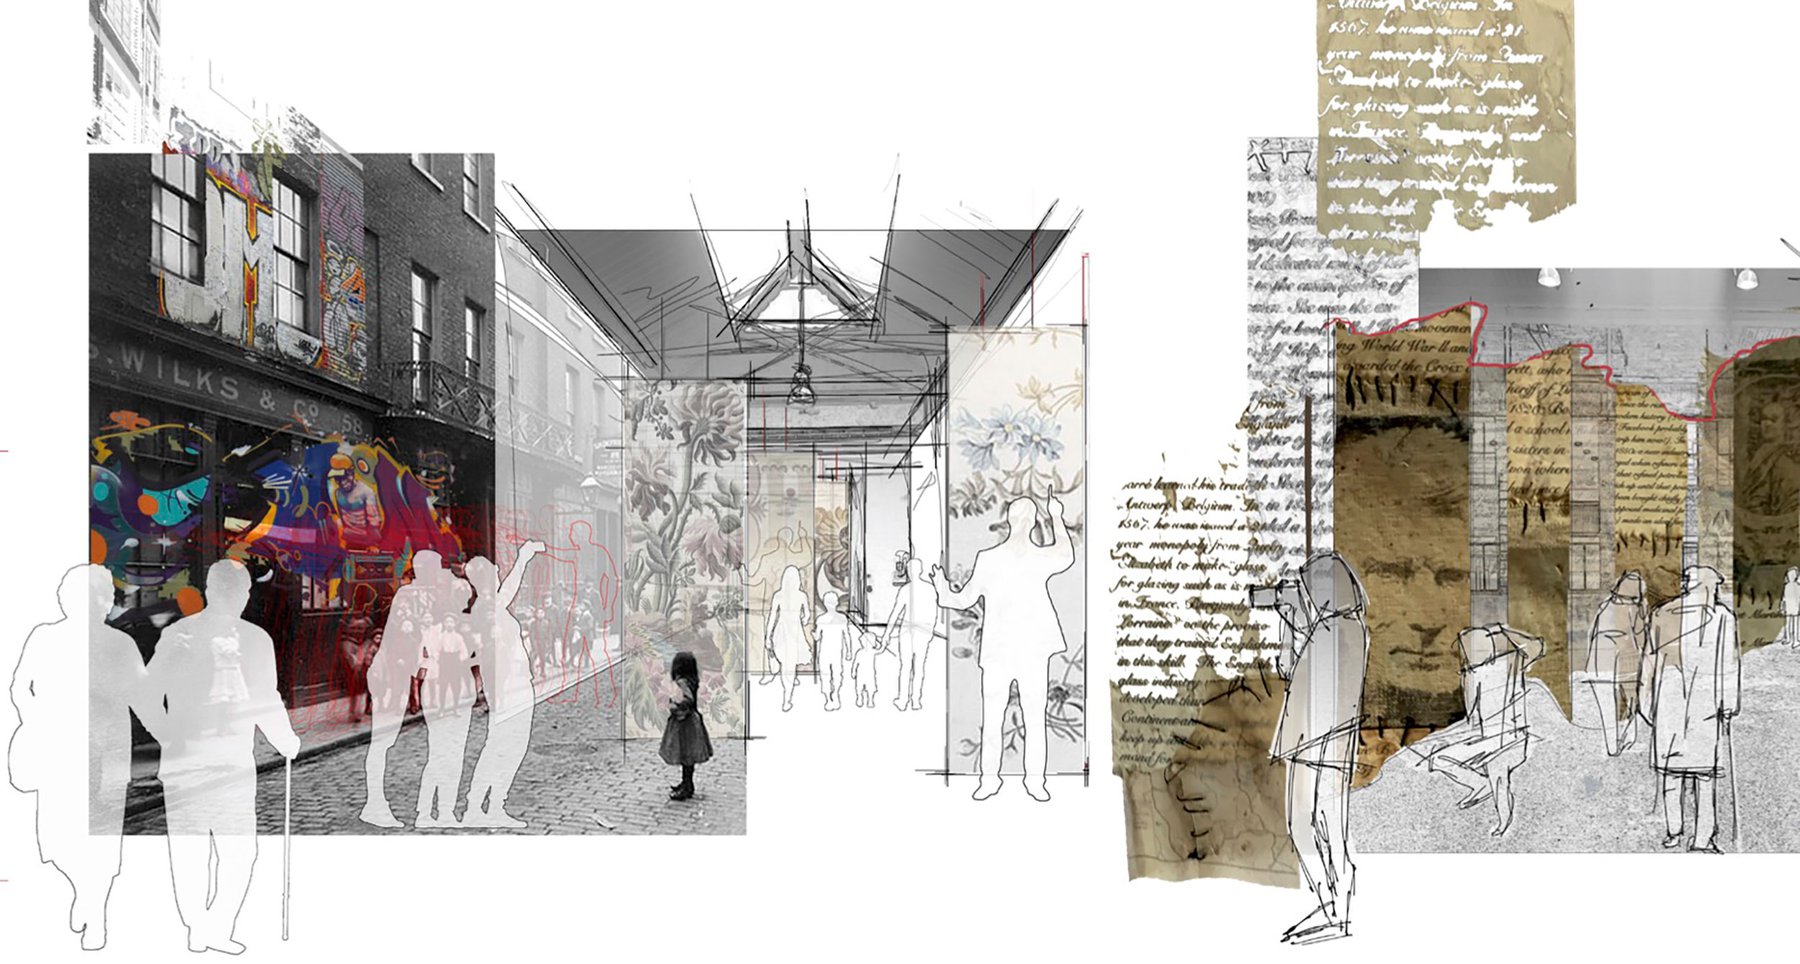 A Walk Through Time in Spitalfields | Into the pasageway leaving traces on interactive screens